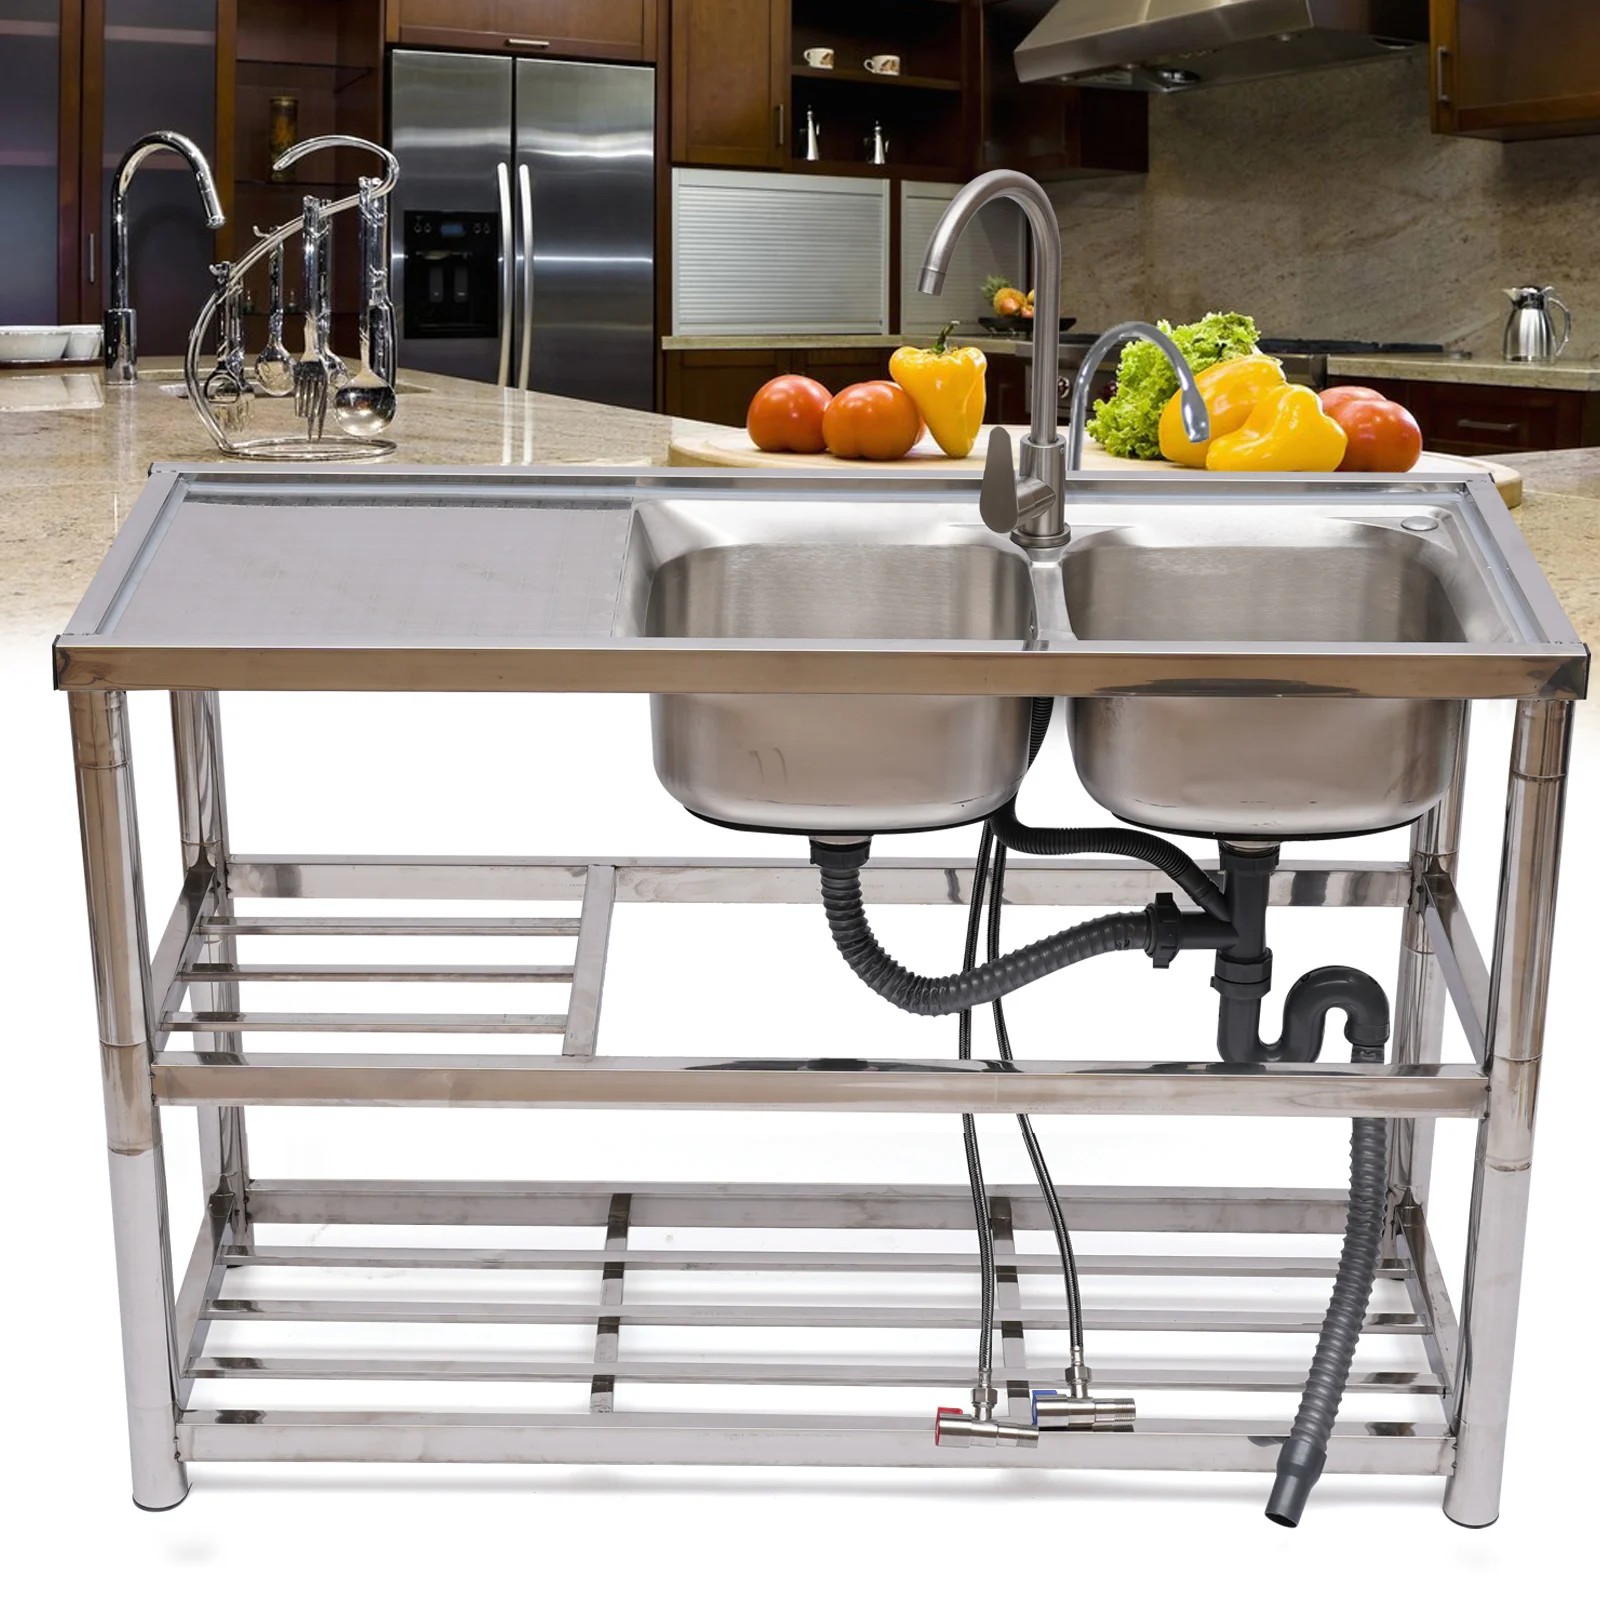 2 Compartment Catering Sink Commercial Stainless Steel Kitchen Sink Dish Washing Disinfection Pool with Standing Rack Drainer